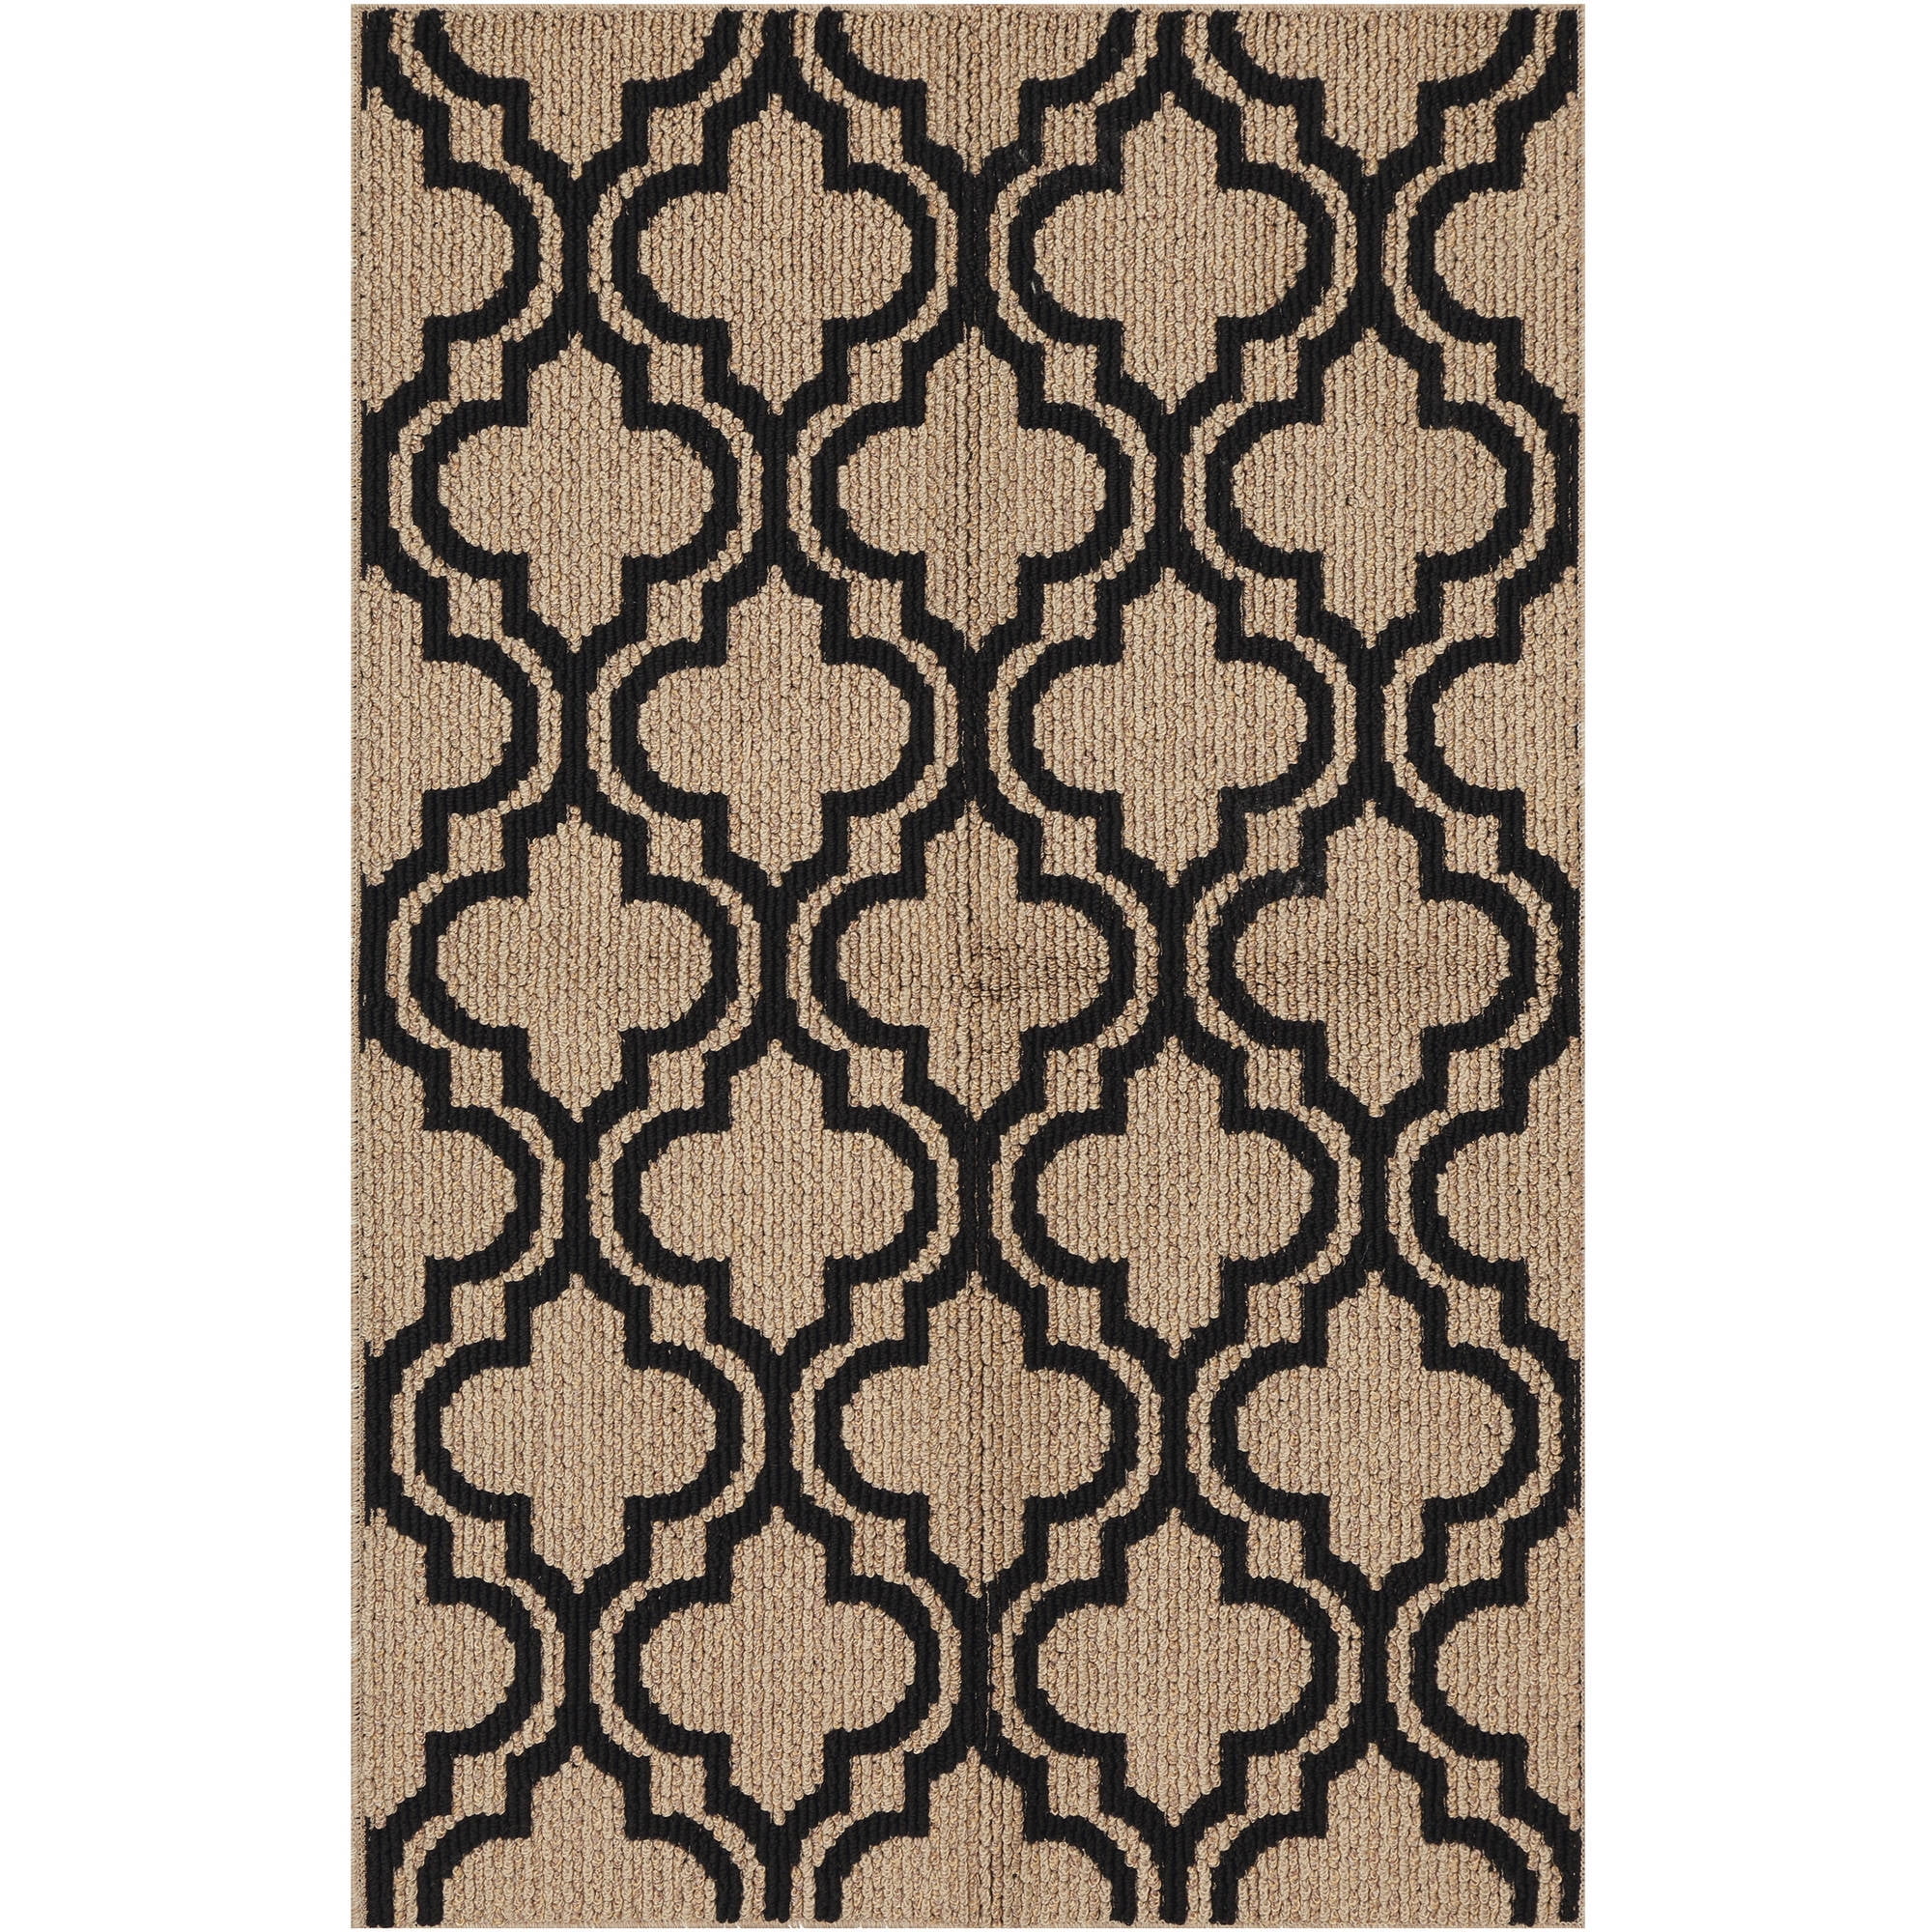 Mainstays Black Trellis Accent Rug, Black And Tan Rugs